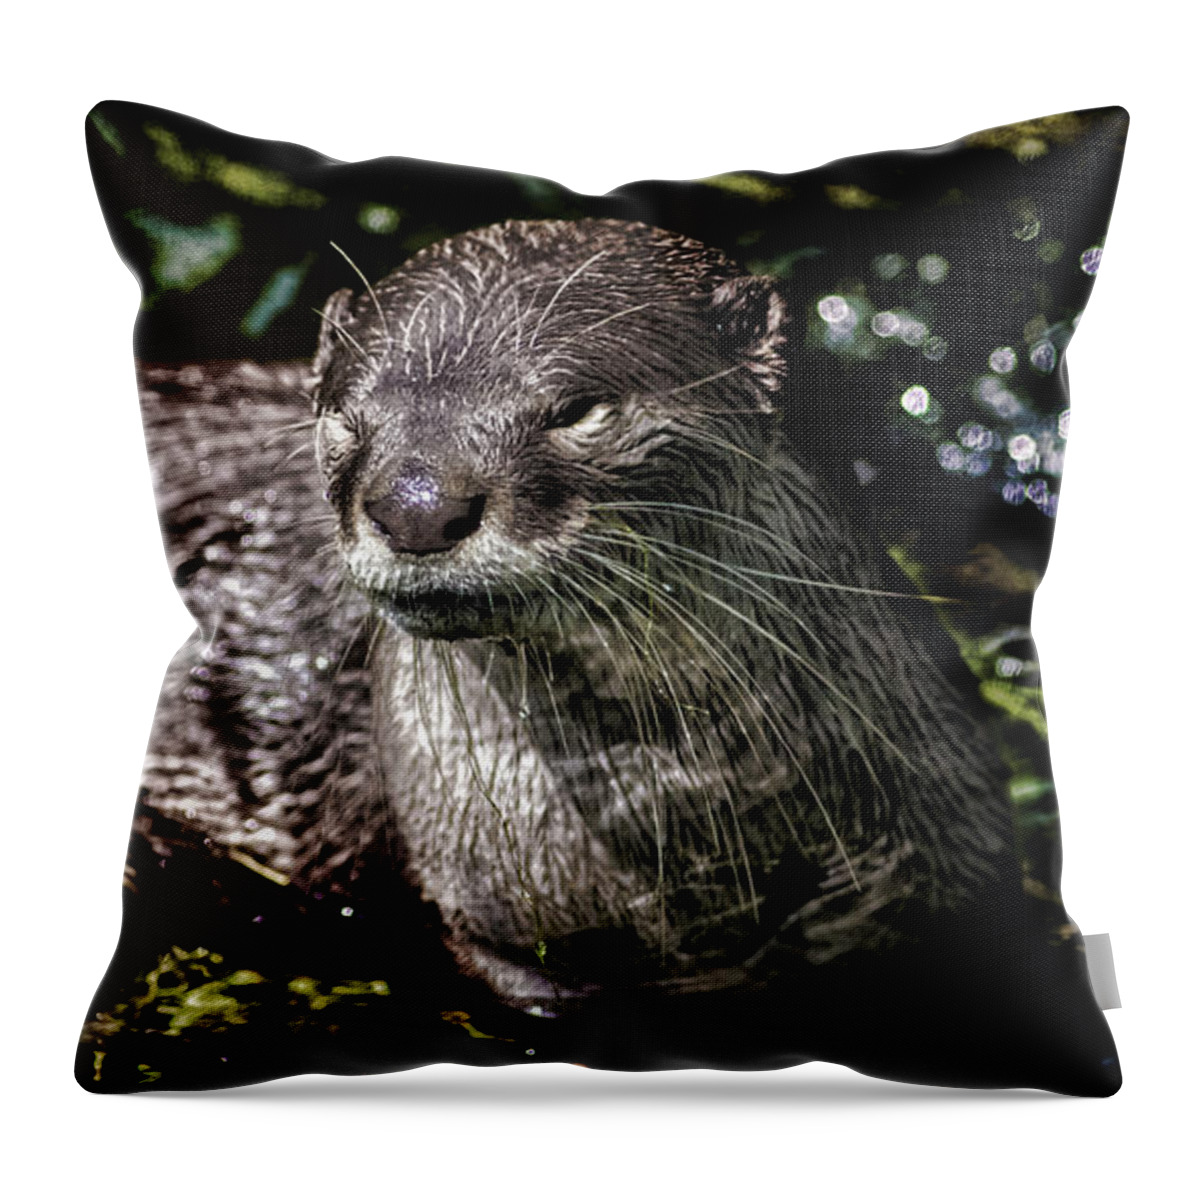 Otter Throw Pillow featuring the photograph Otter #1 by Martin Newman